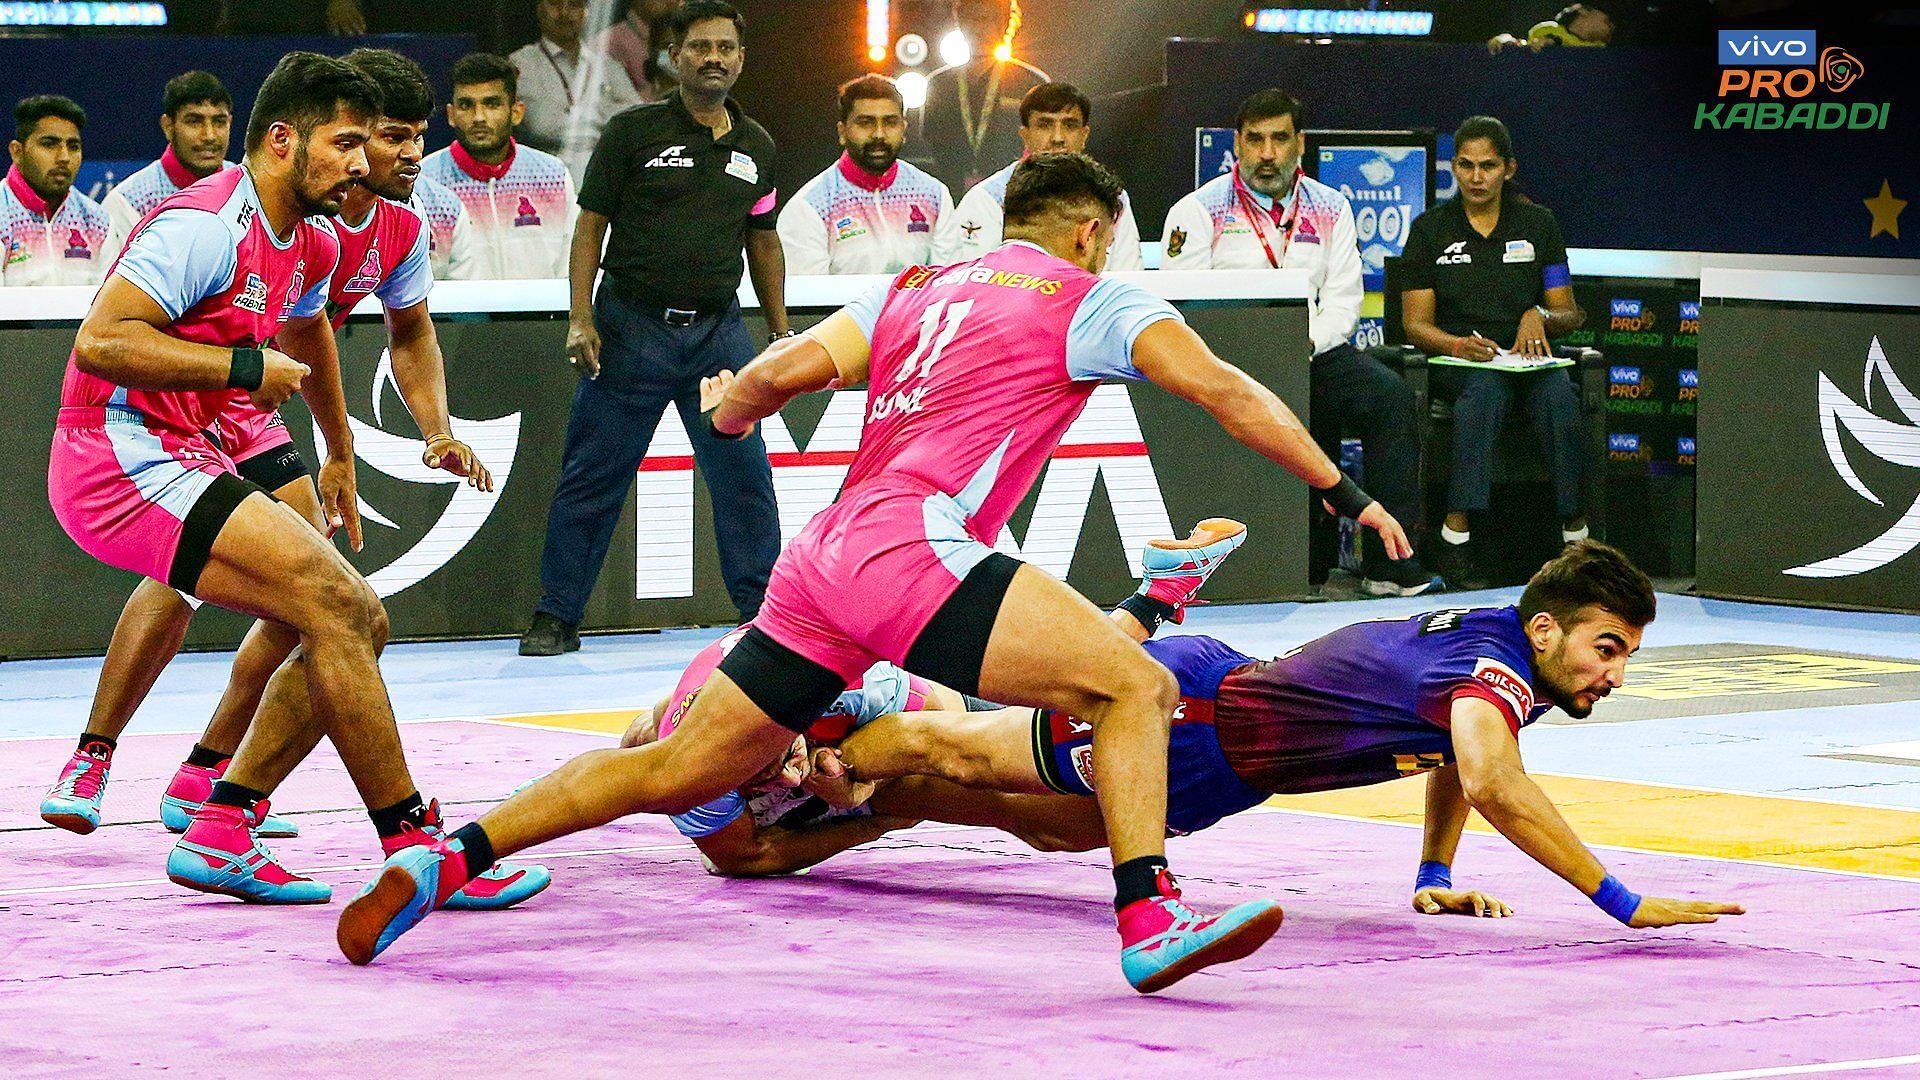 3 matches happened in the Pro Kabaddi League yesterday (Image: PKL/Twitter)